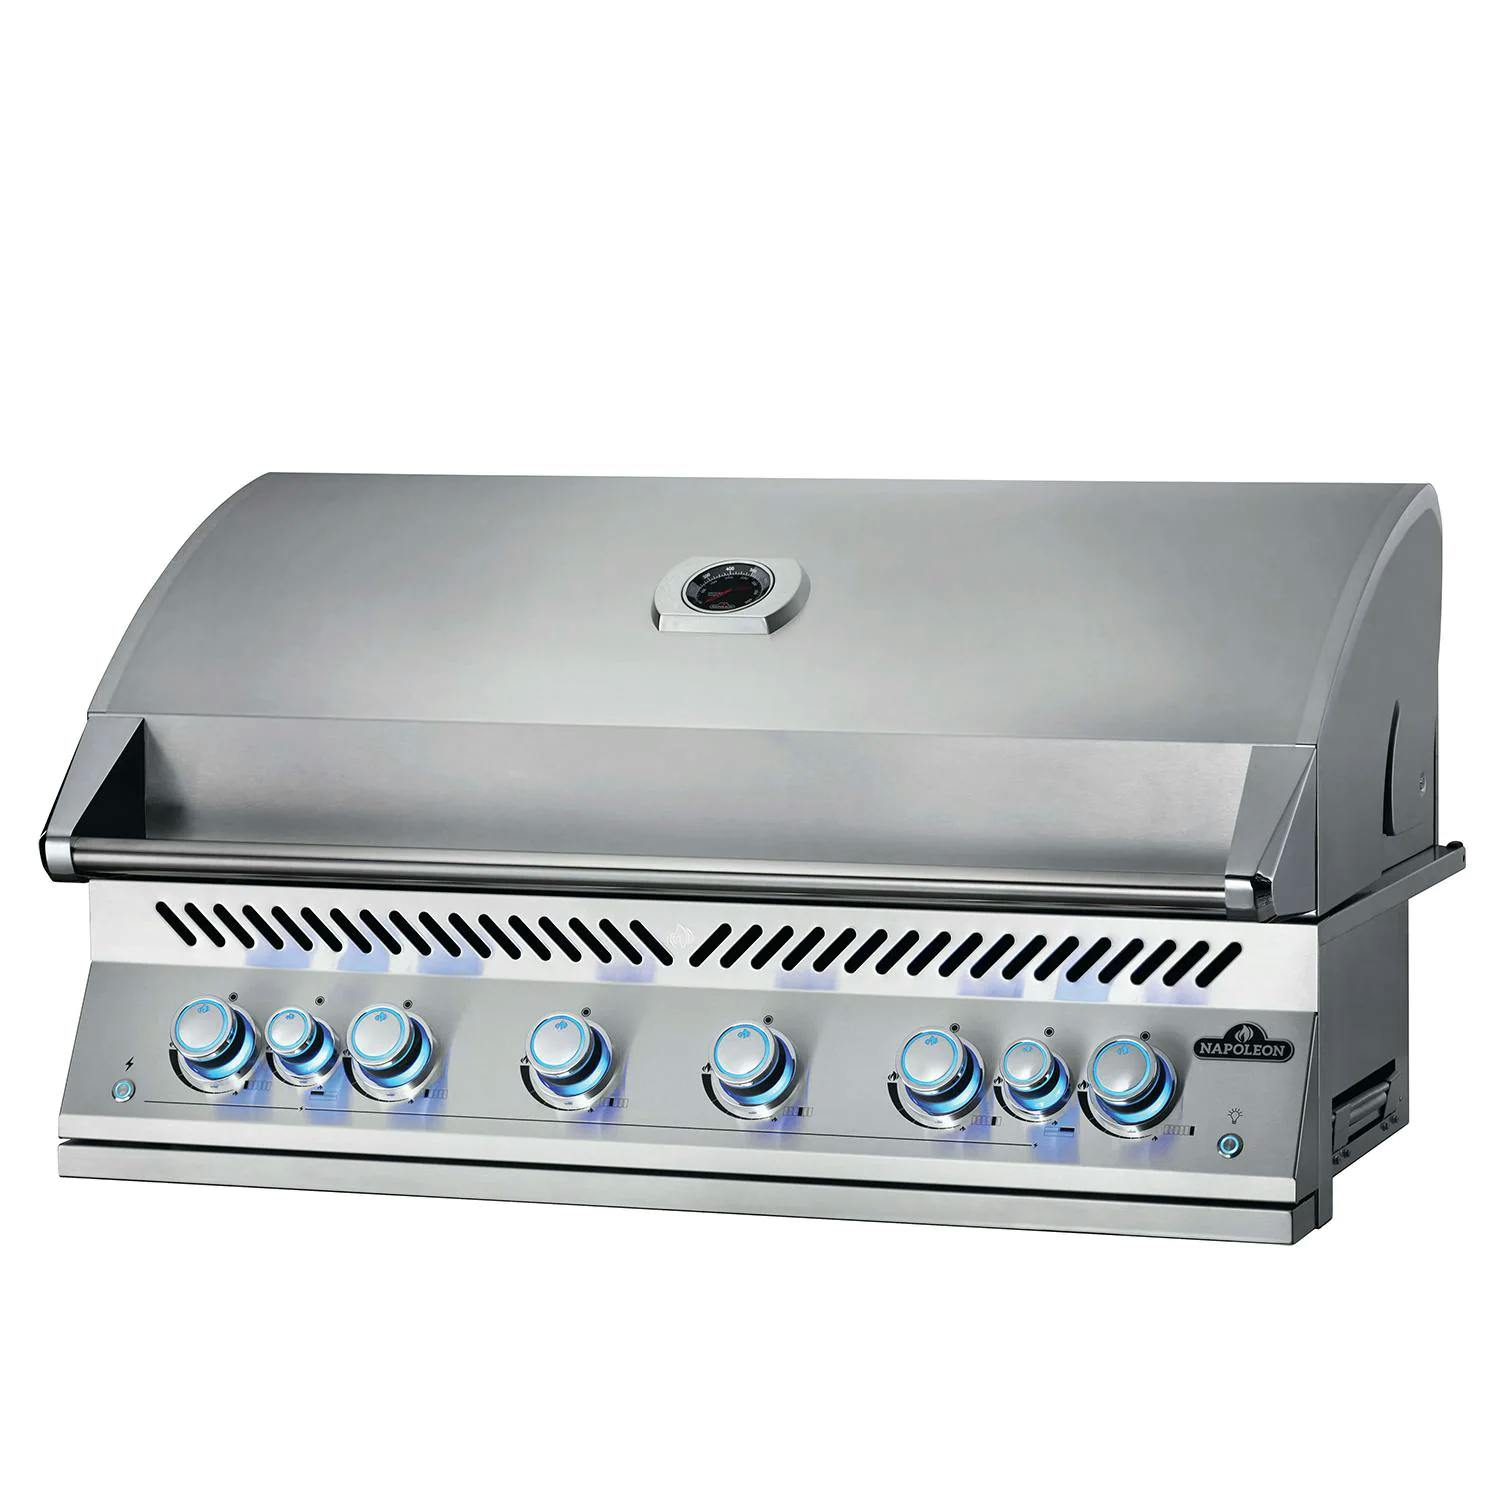 Napoleon 700 Series Built-in Gas Grill with Infrared Rear Burner and Rotisserie Kit · 44 in. · Natural Gas